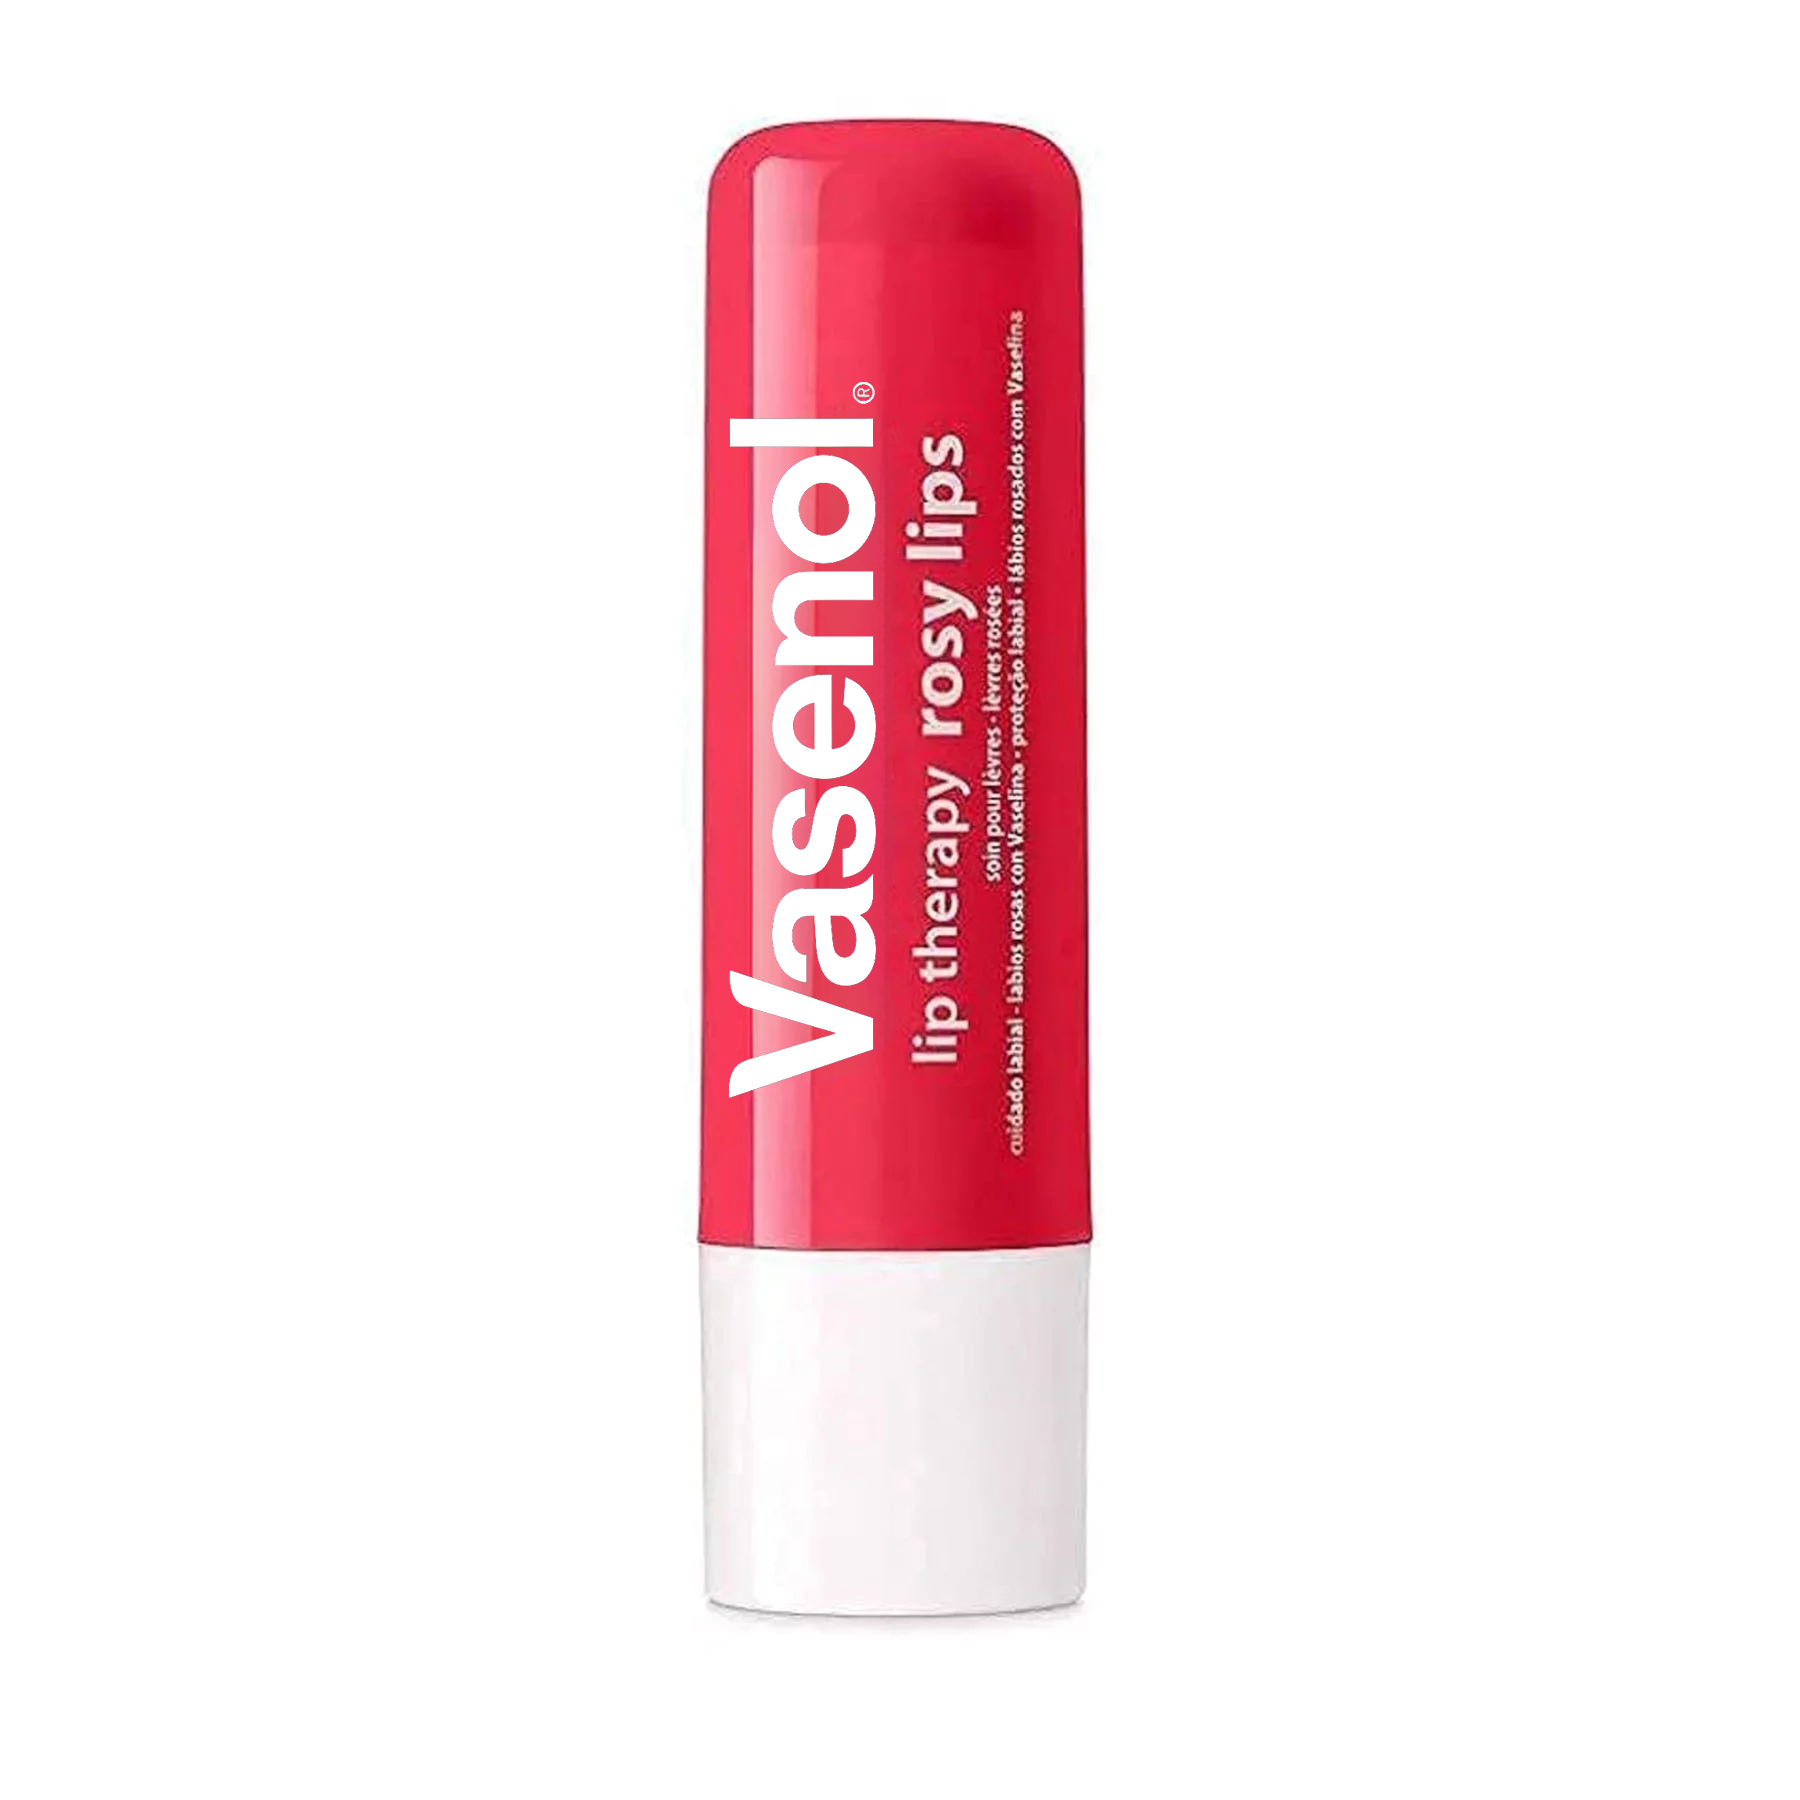 Vaseline-Lip-Therapy-Care-Rosy-for-Softer-Lips-0-16-oz-1-Stick_f13e65ab-3d9f-4e9b-8240-a1cafa41ee18.1e201d1639294957aeb0e89c0e87cbfb